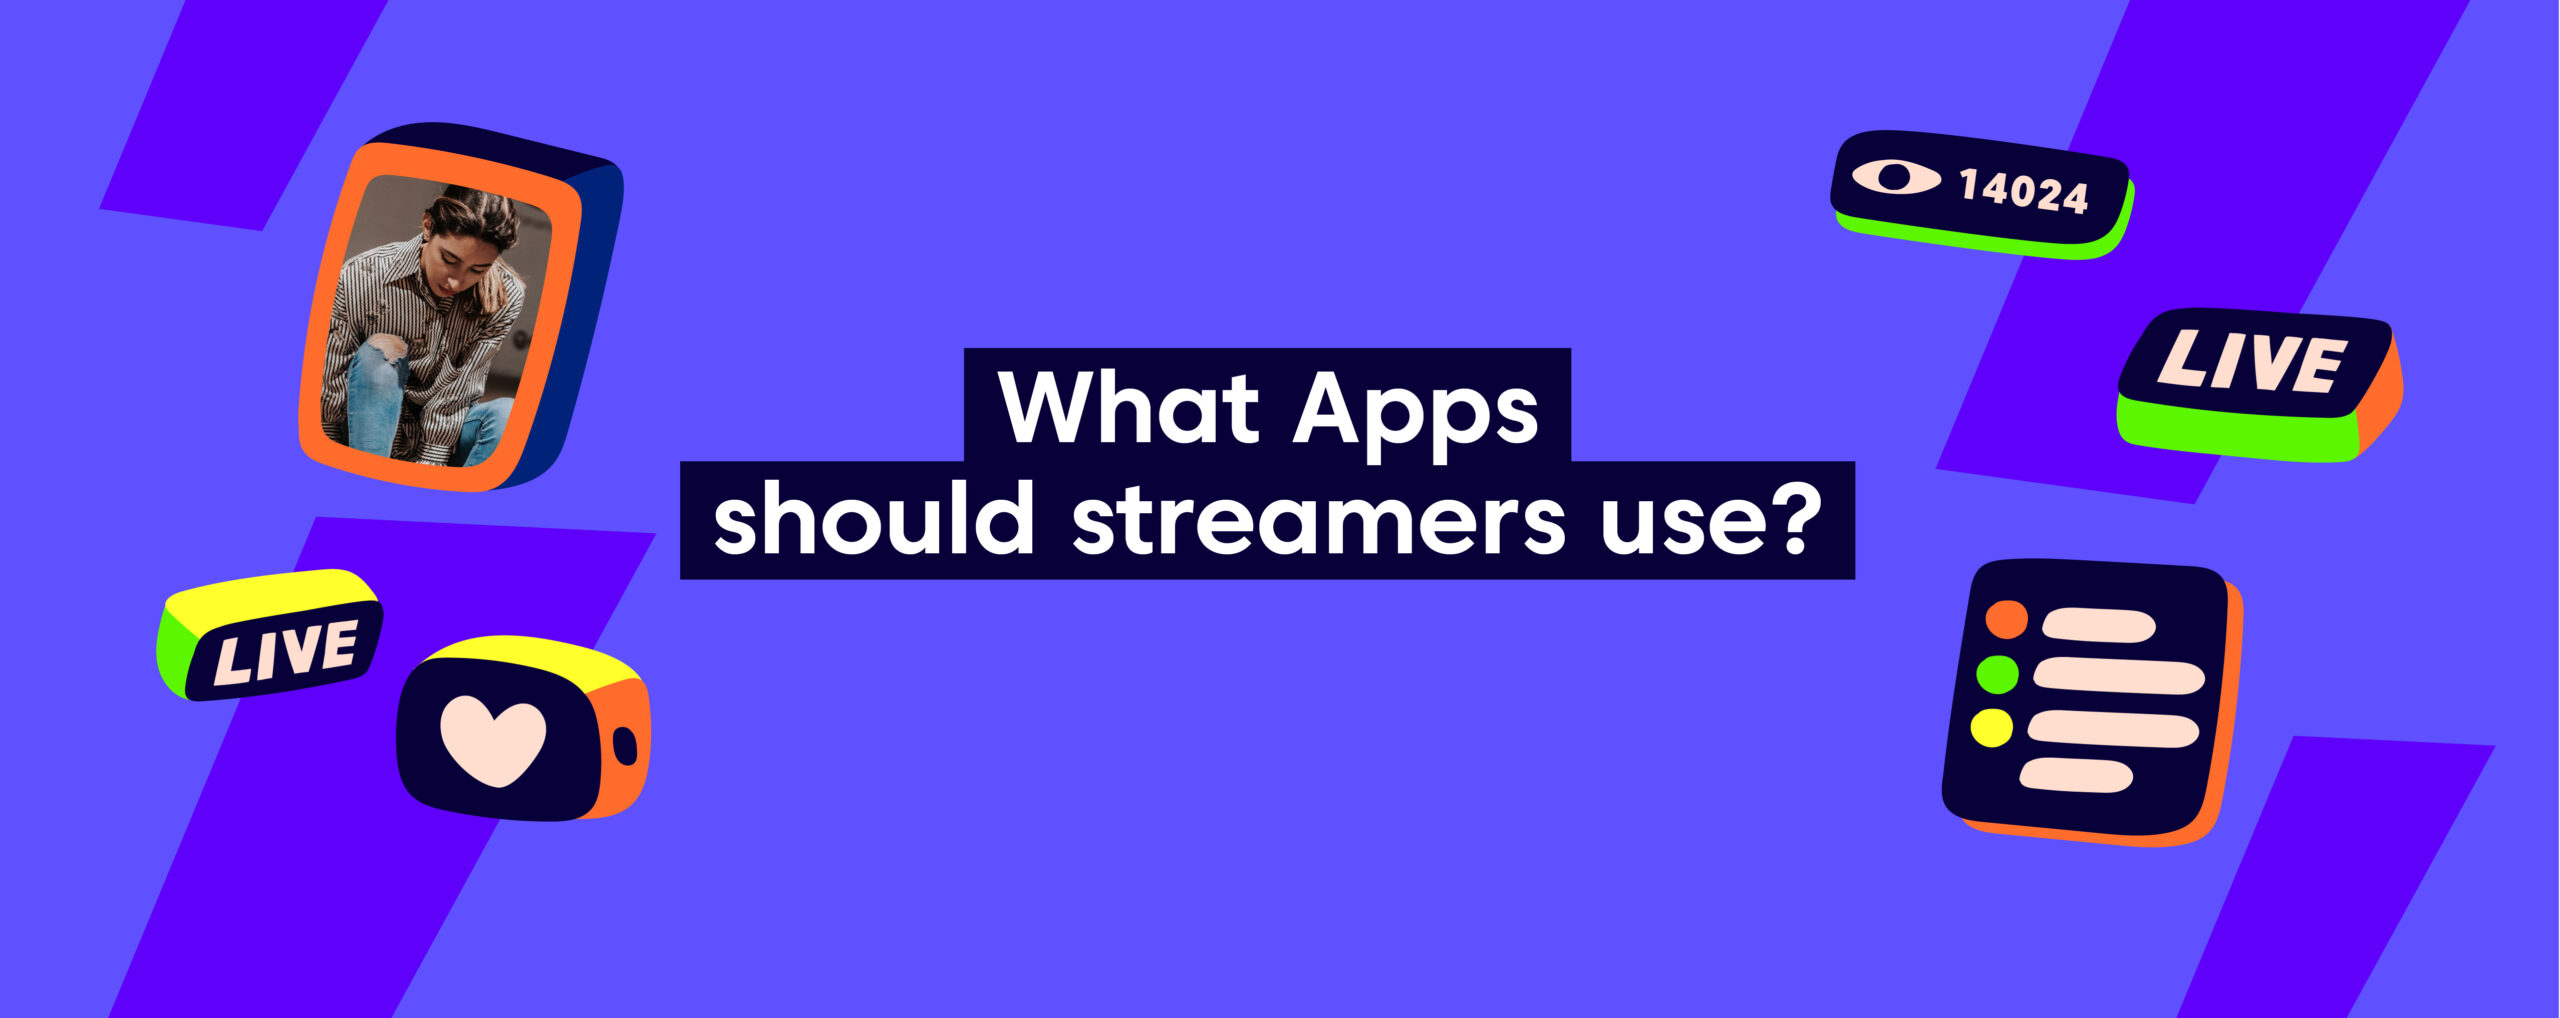 Top 10 Useful Live Streaming Apps for Streamers - Castr's Blog